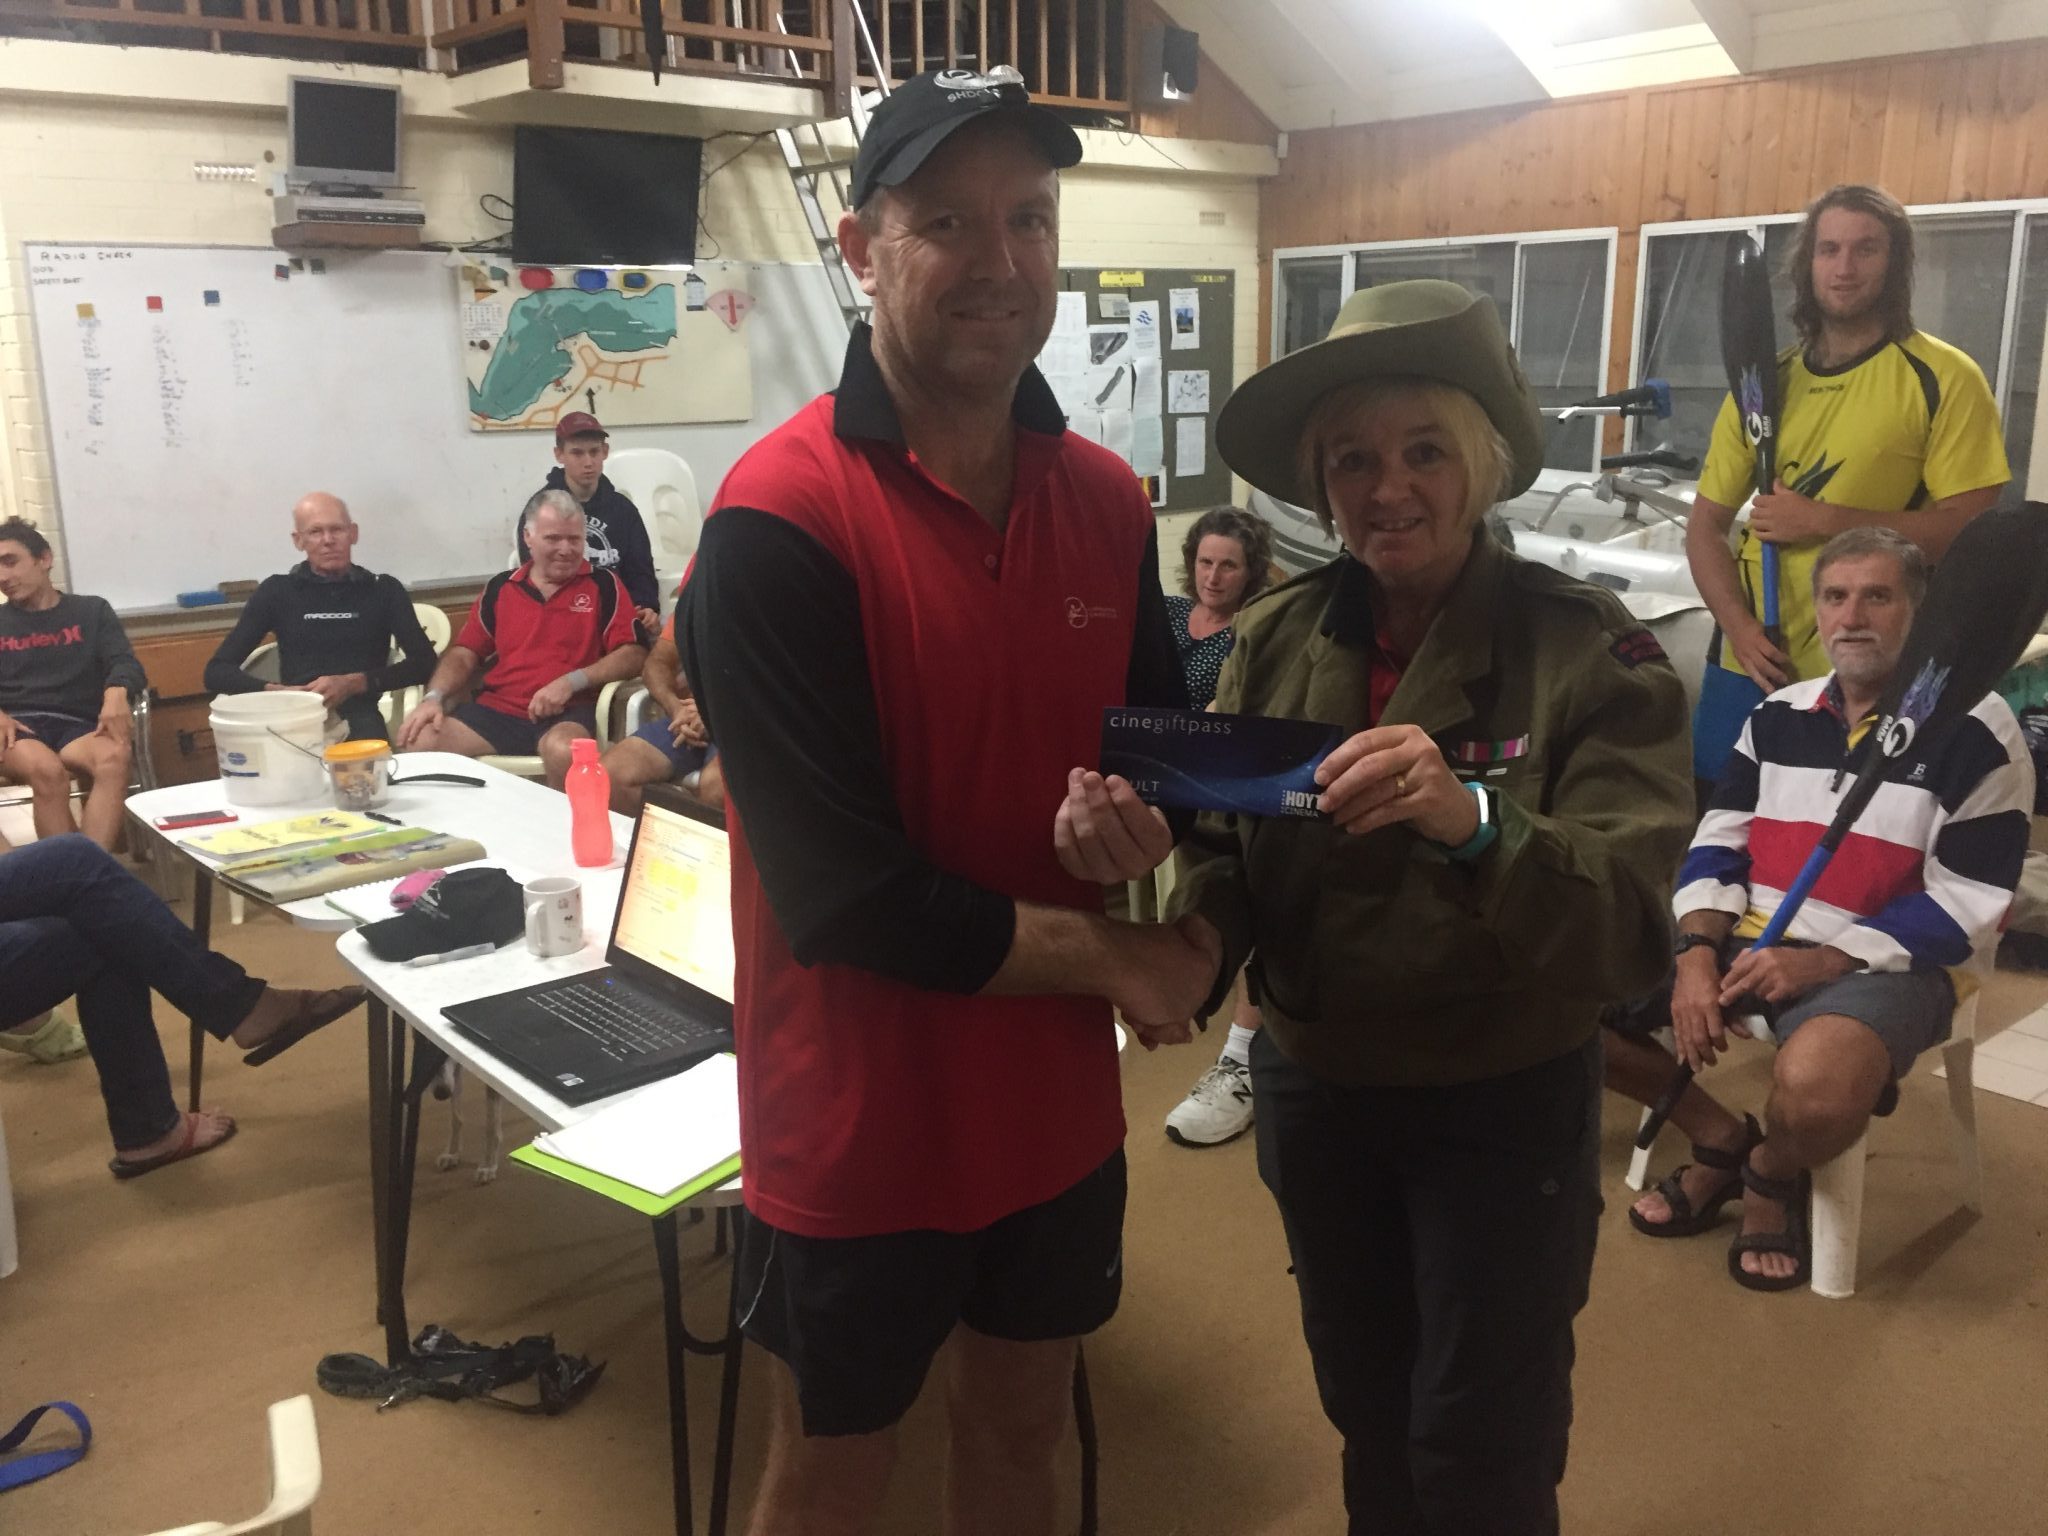 Tues 25th April 2017 Anzac Day Club Night : Tonight's photo shows Club Secretary Judith Thompson in her Anzac gear presenting Simon with a movie voucher.